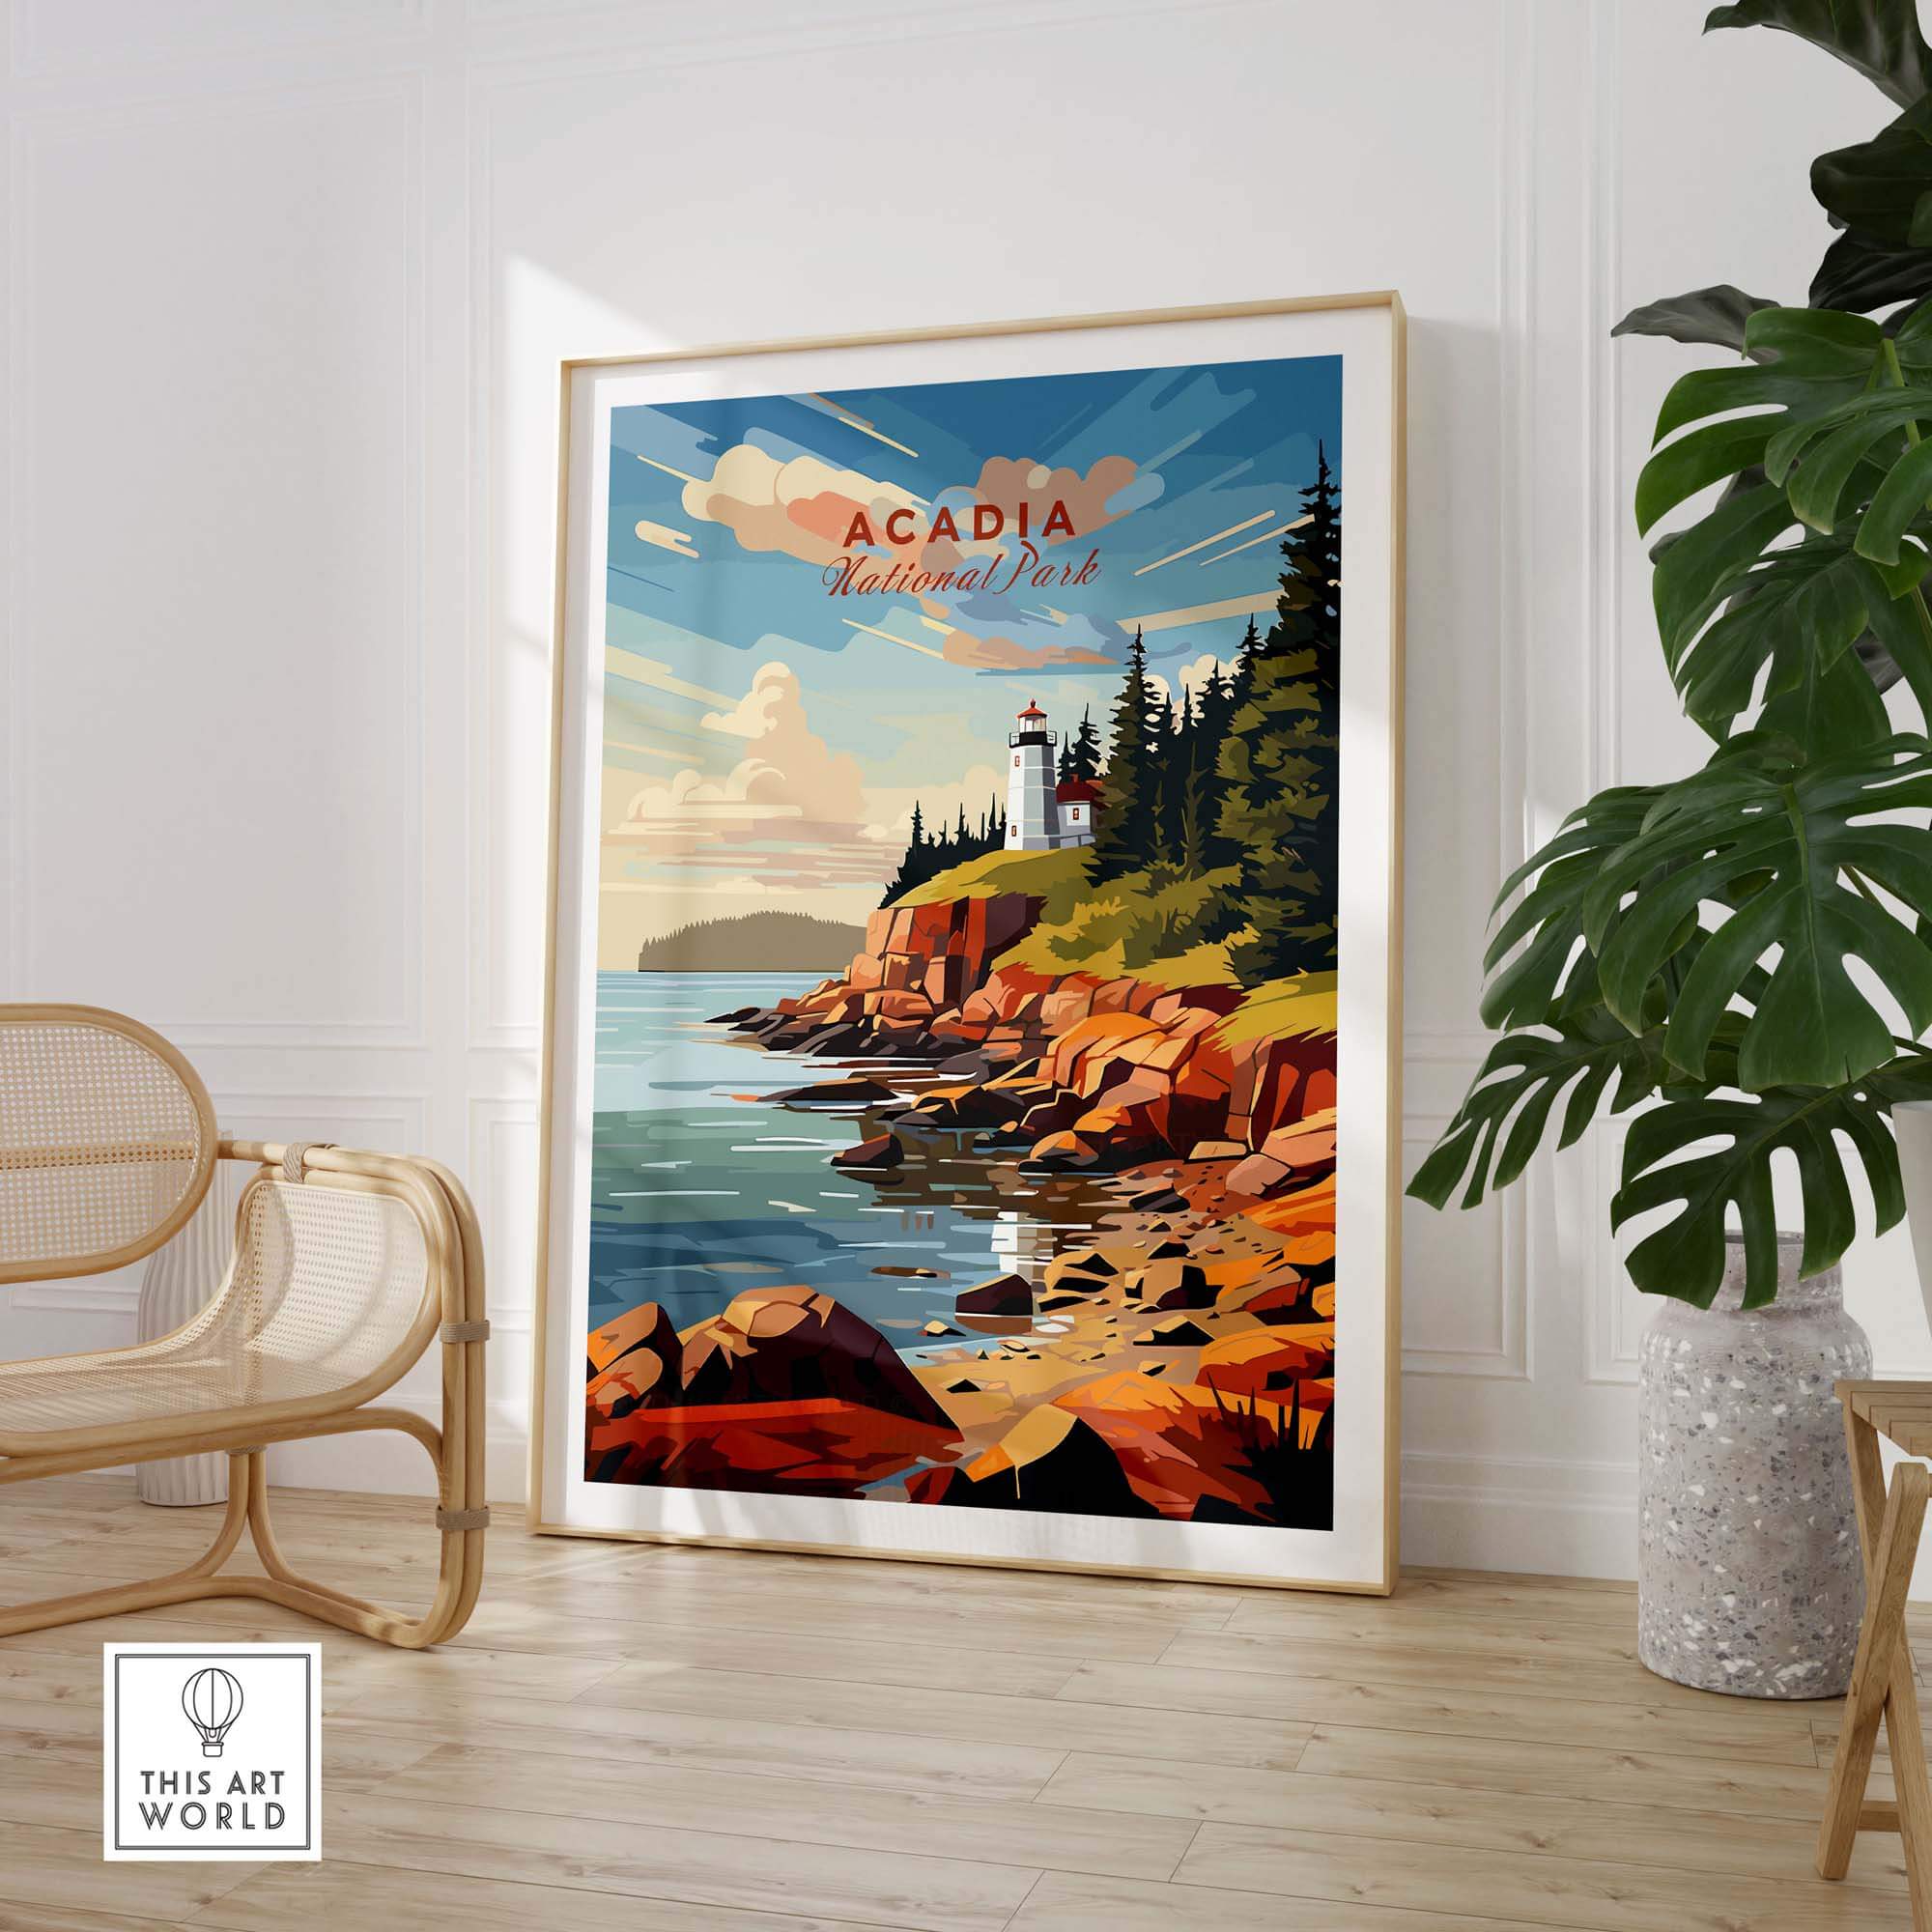 Acadia National Park Poster featuring the lighthouse at sunset, framed in natural wood frame next to a chair